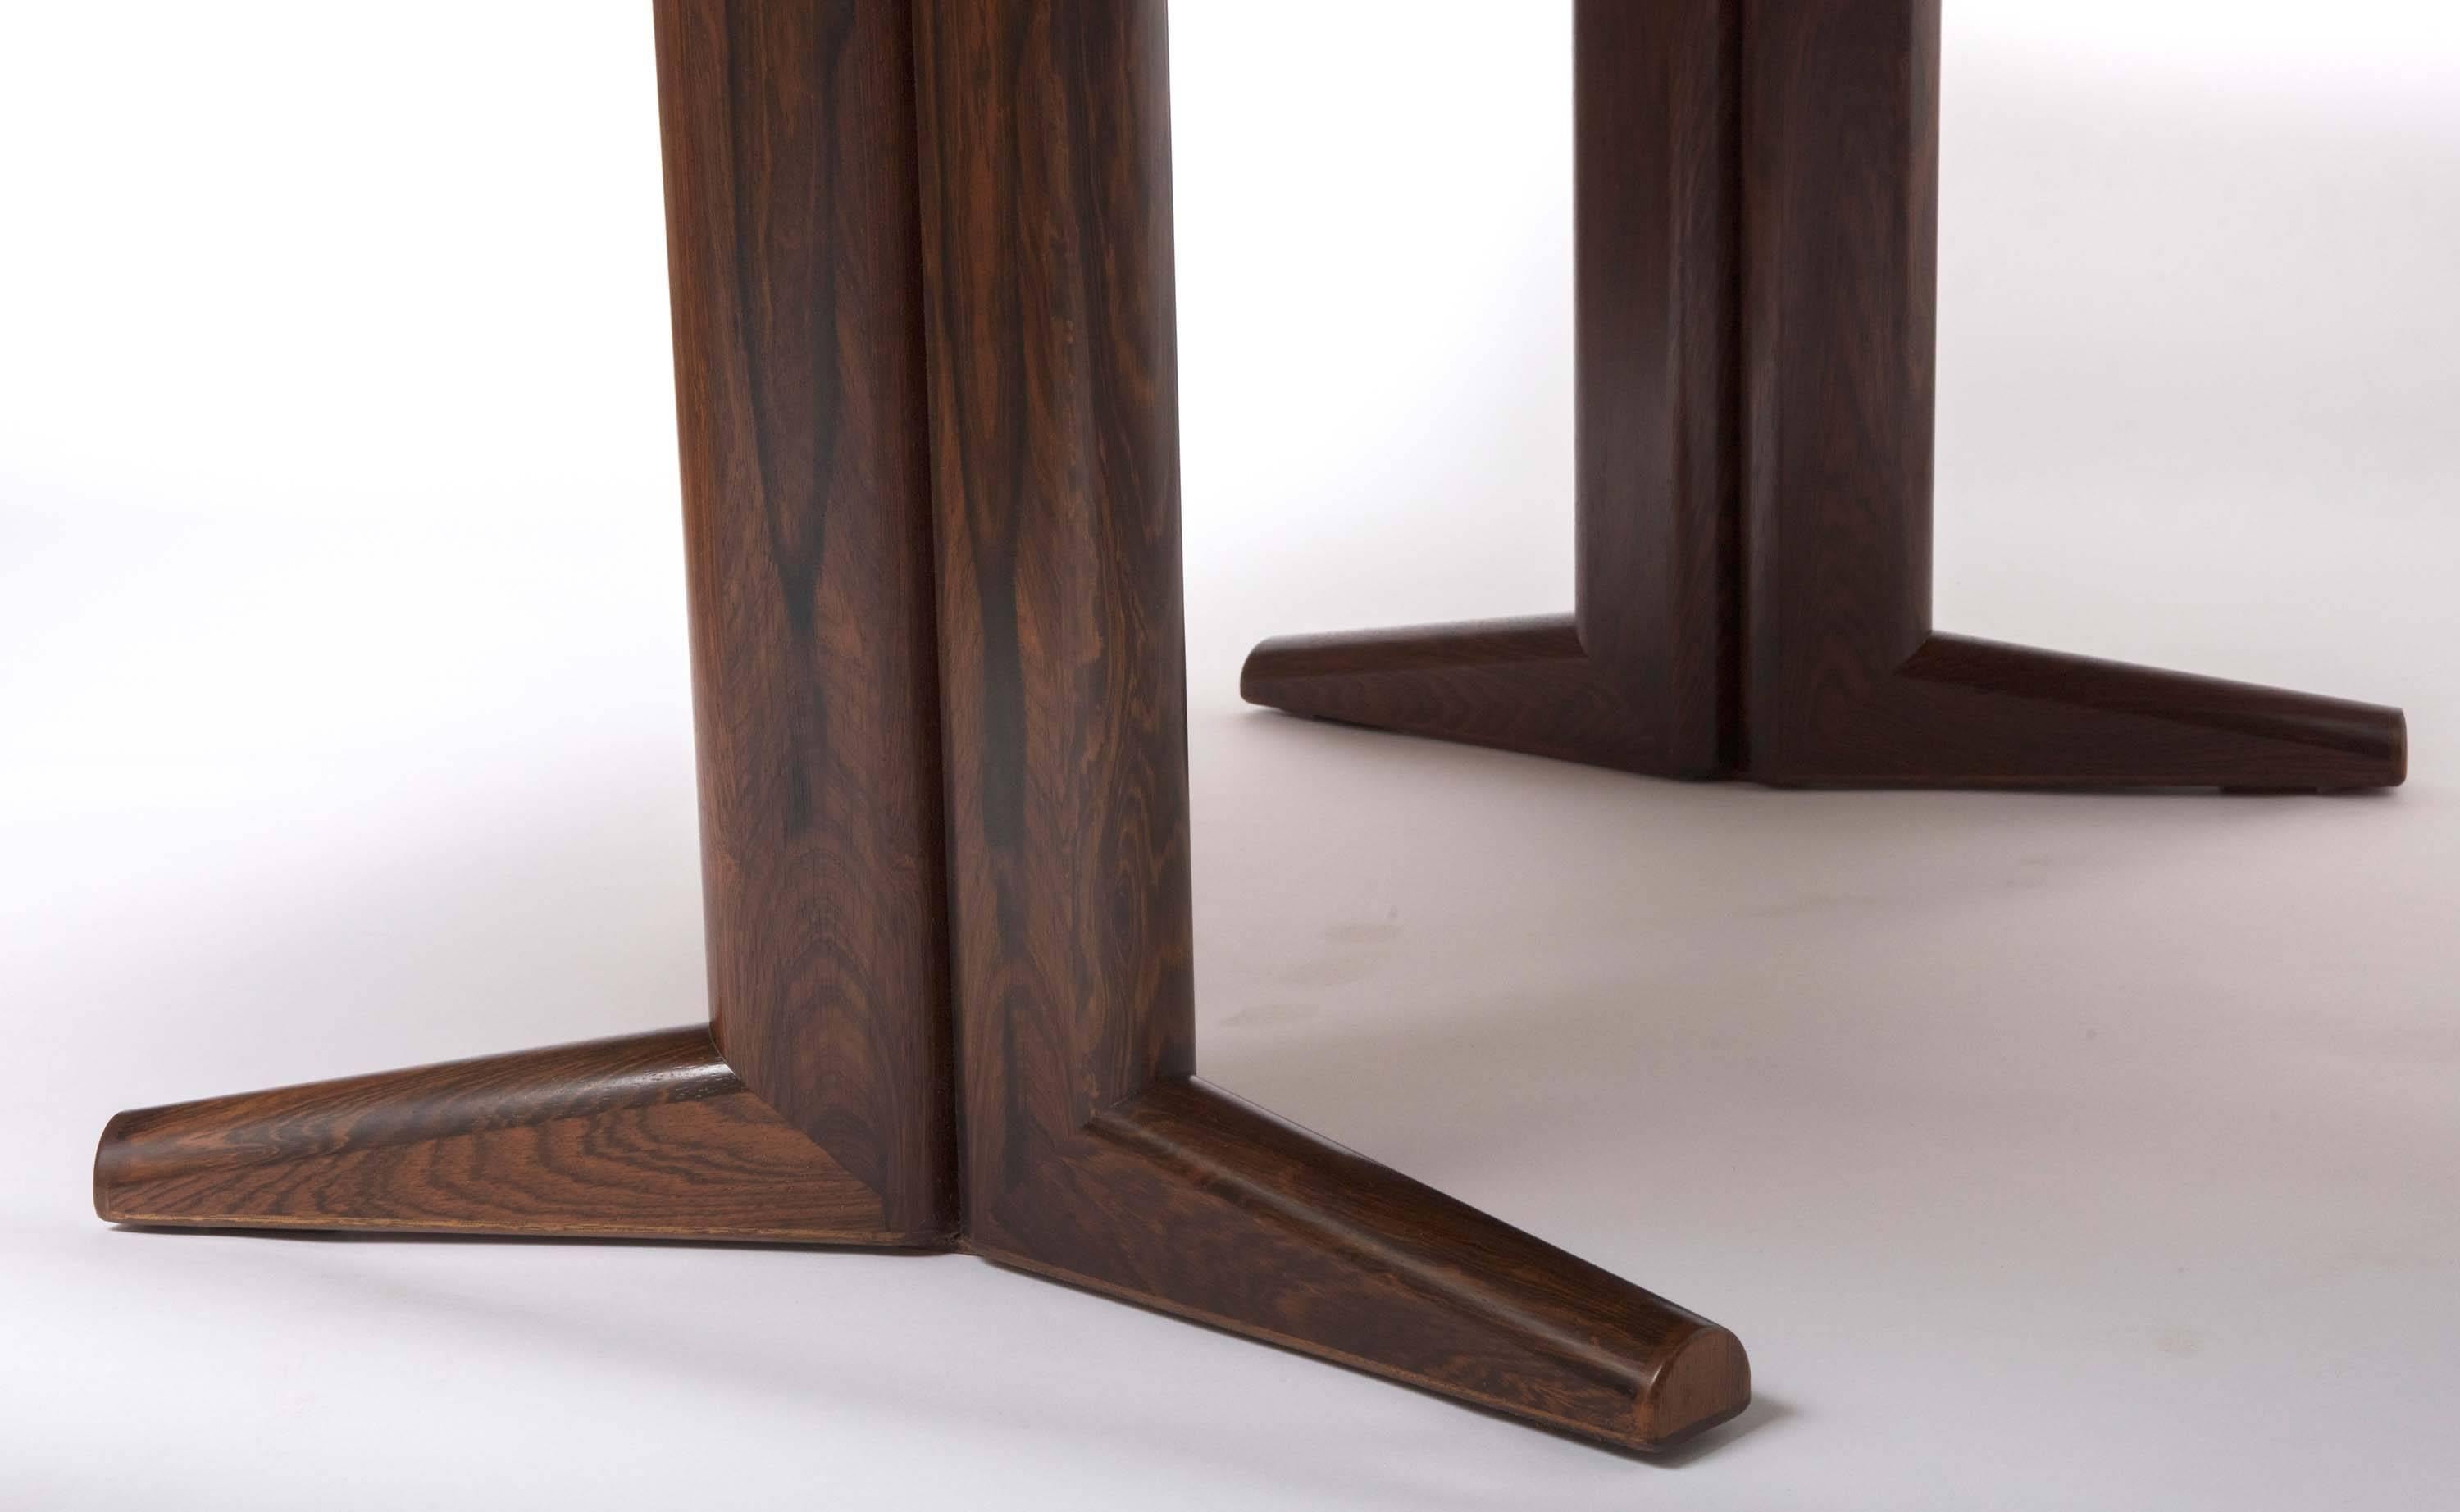 A Gordon Russell rosewood dining table.
Fine veneers.
“Marlow” design,
England, circa 1970.
Measures: 197 cm long x 107 cm wide x 73 cm high (Table extended 297 long).
 